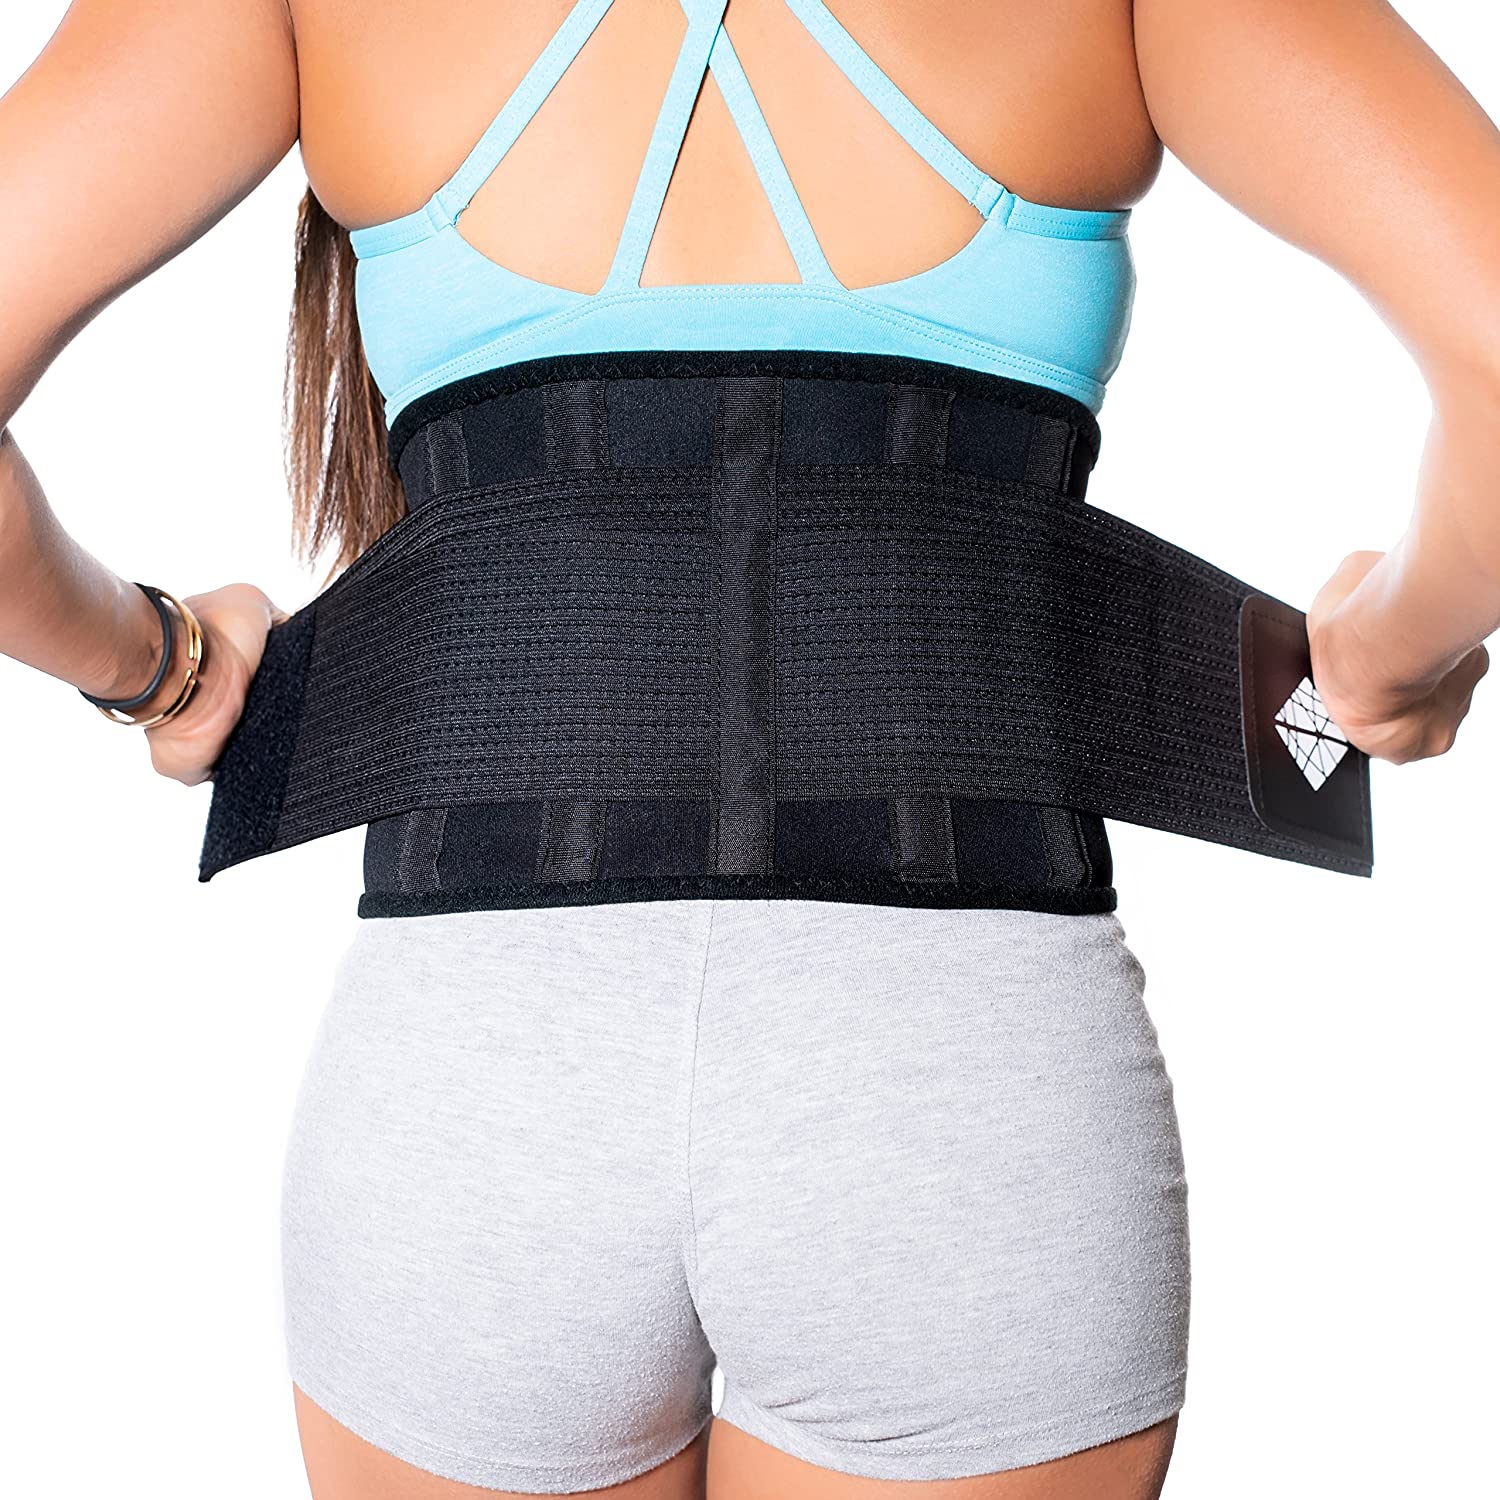 Health & Fitness - Personal Health Care - Braces & Support - ObusForme Heated  Back Belt Support - Online Shopping for Canadians